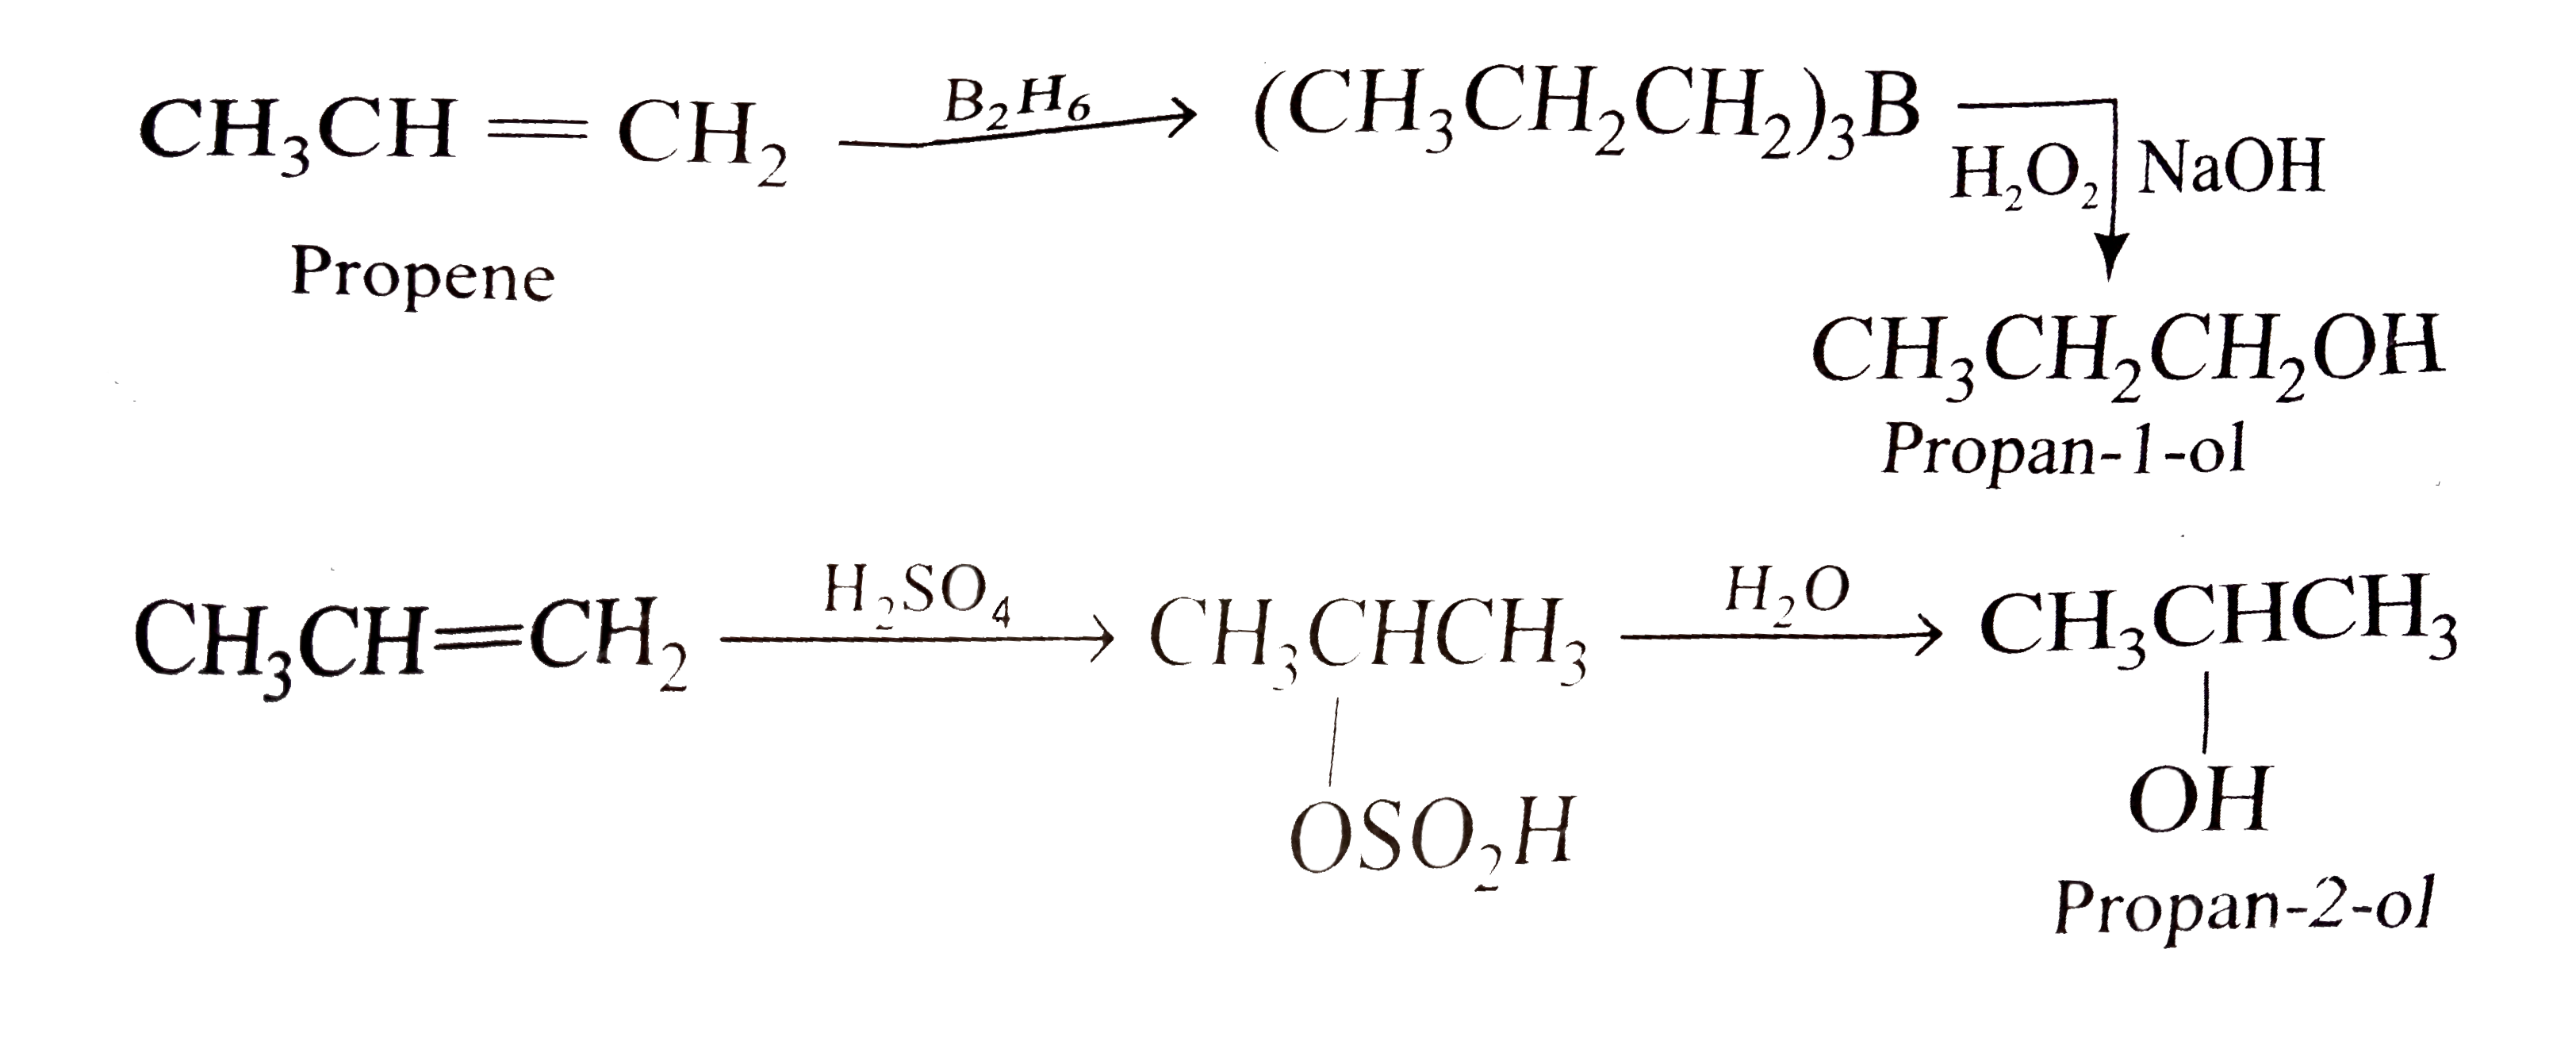 Propan1-ol may be prepared by reaction of propene with